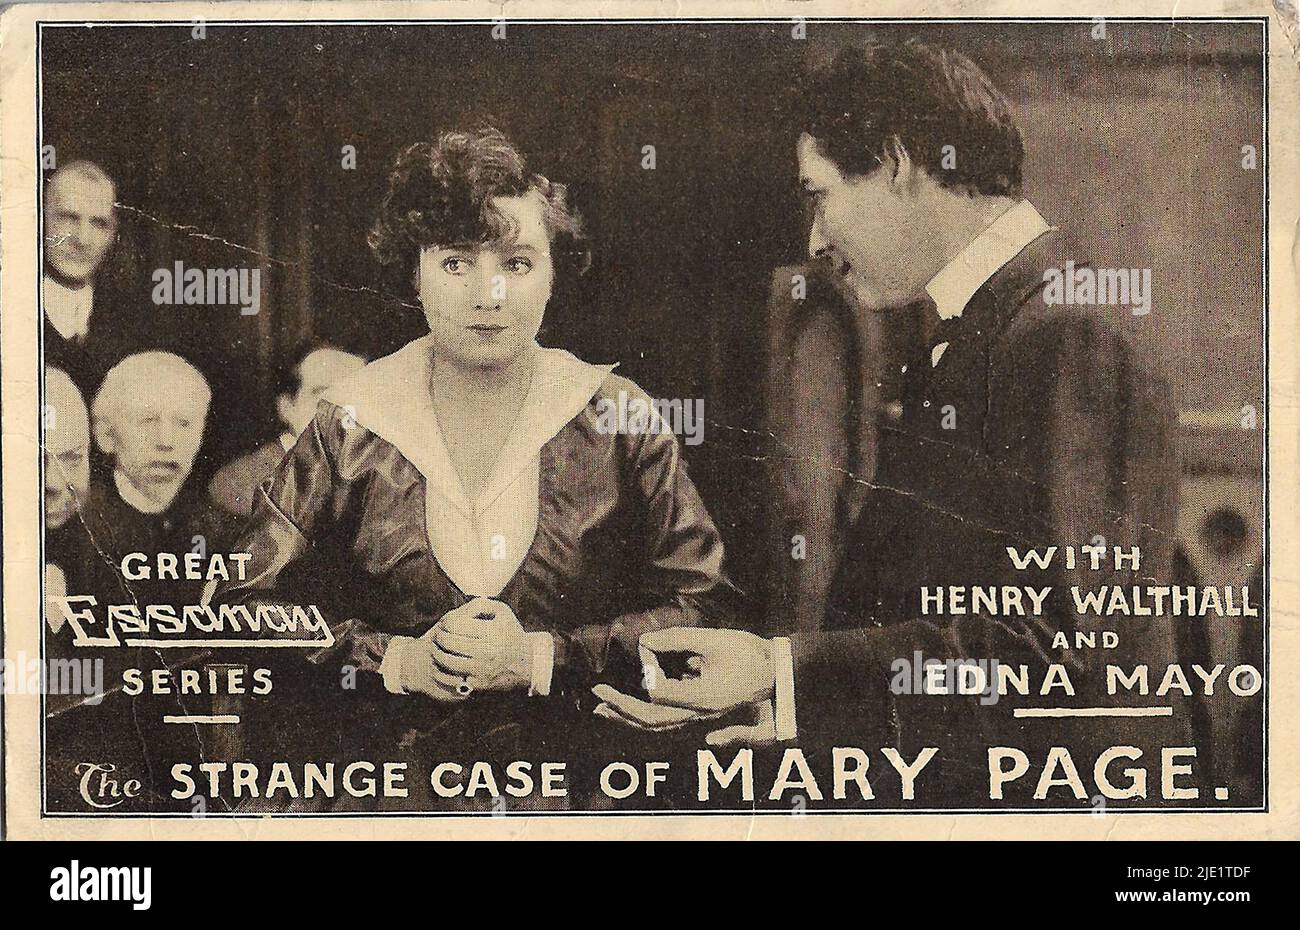 Portrait of Edna Mayo and Henry Walthall in The Strange Case of Mary Page (1916) - American cinema before Hollywood era Stock Photo